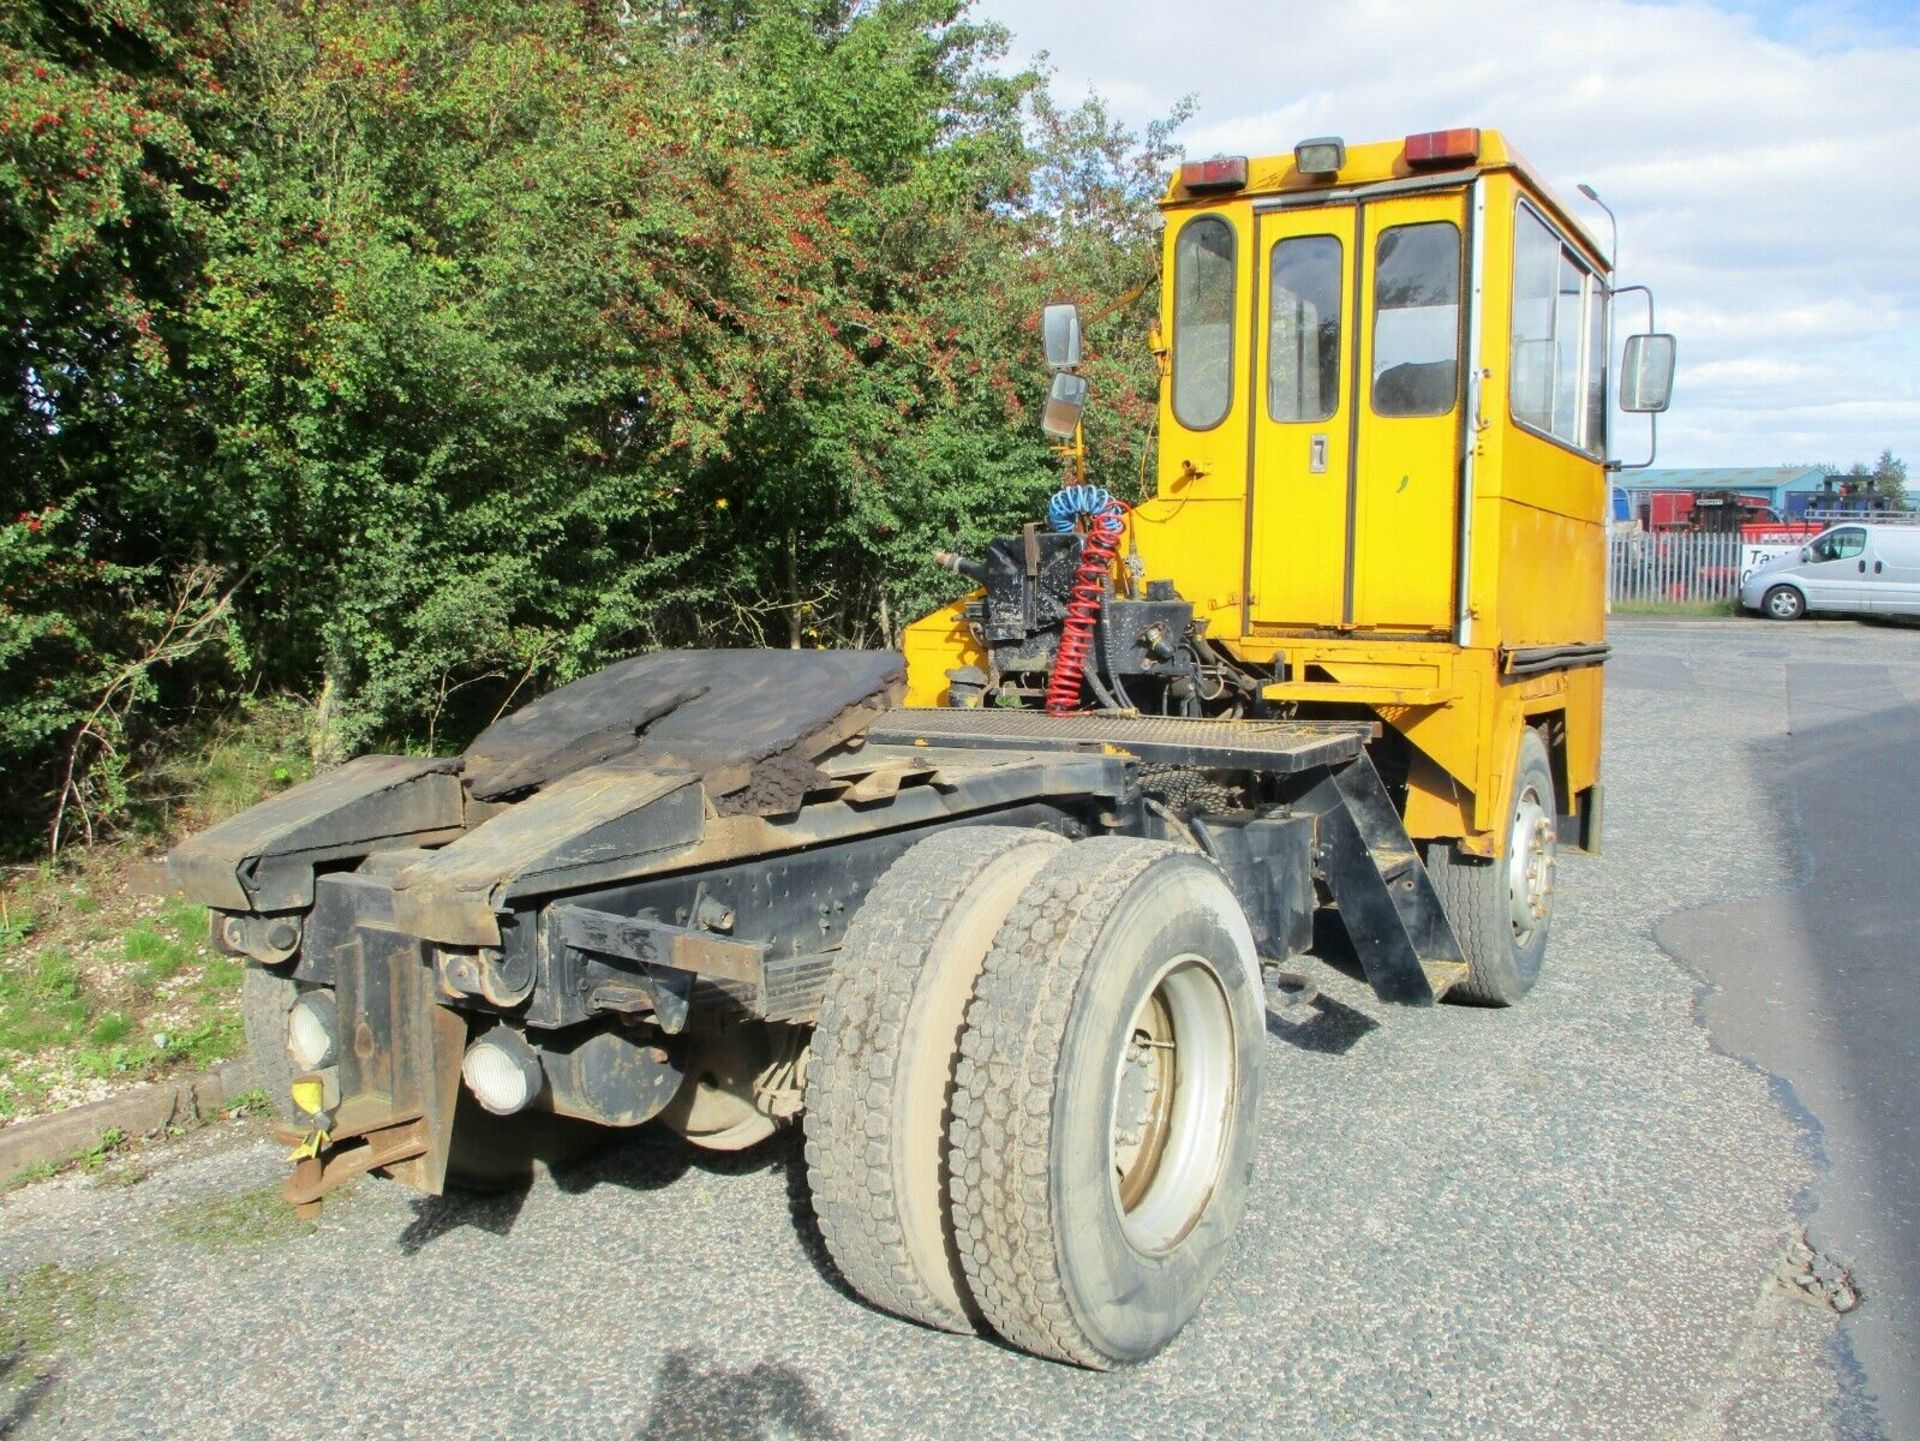 Reliance Dock spotter shunter tow tug tractor unit - Image 11 of 11